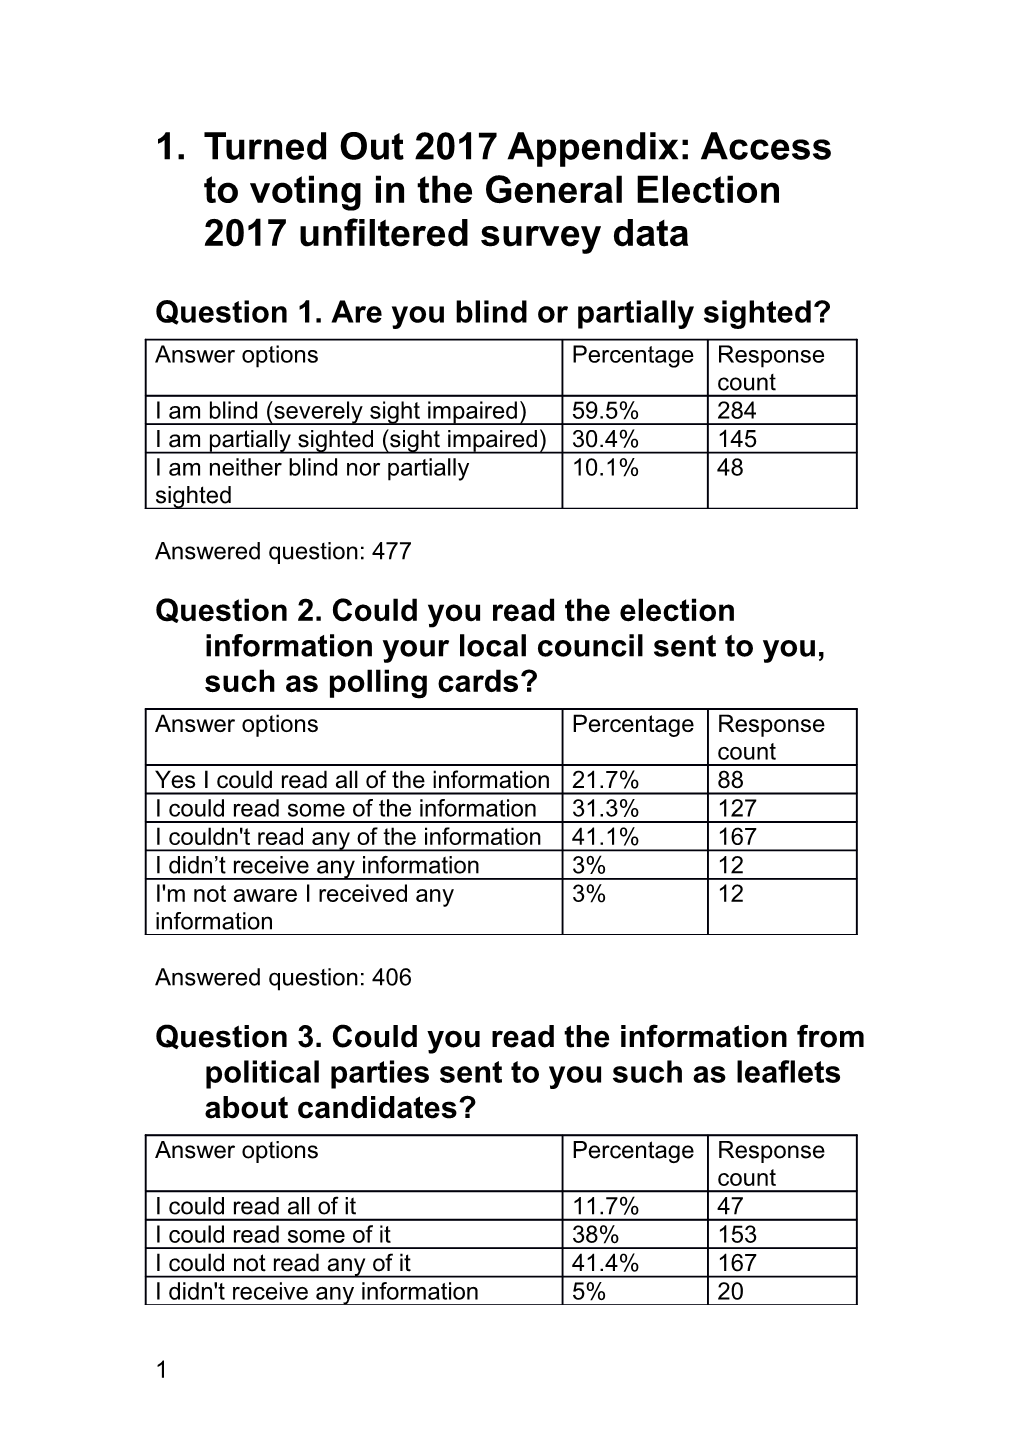 Turned out 2017 Appendix: Access to Voting in the General Election 2017 Unfiltered Survey Data